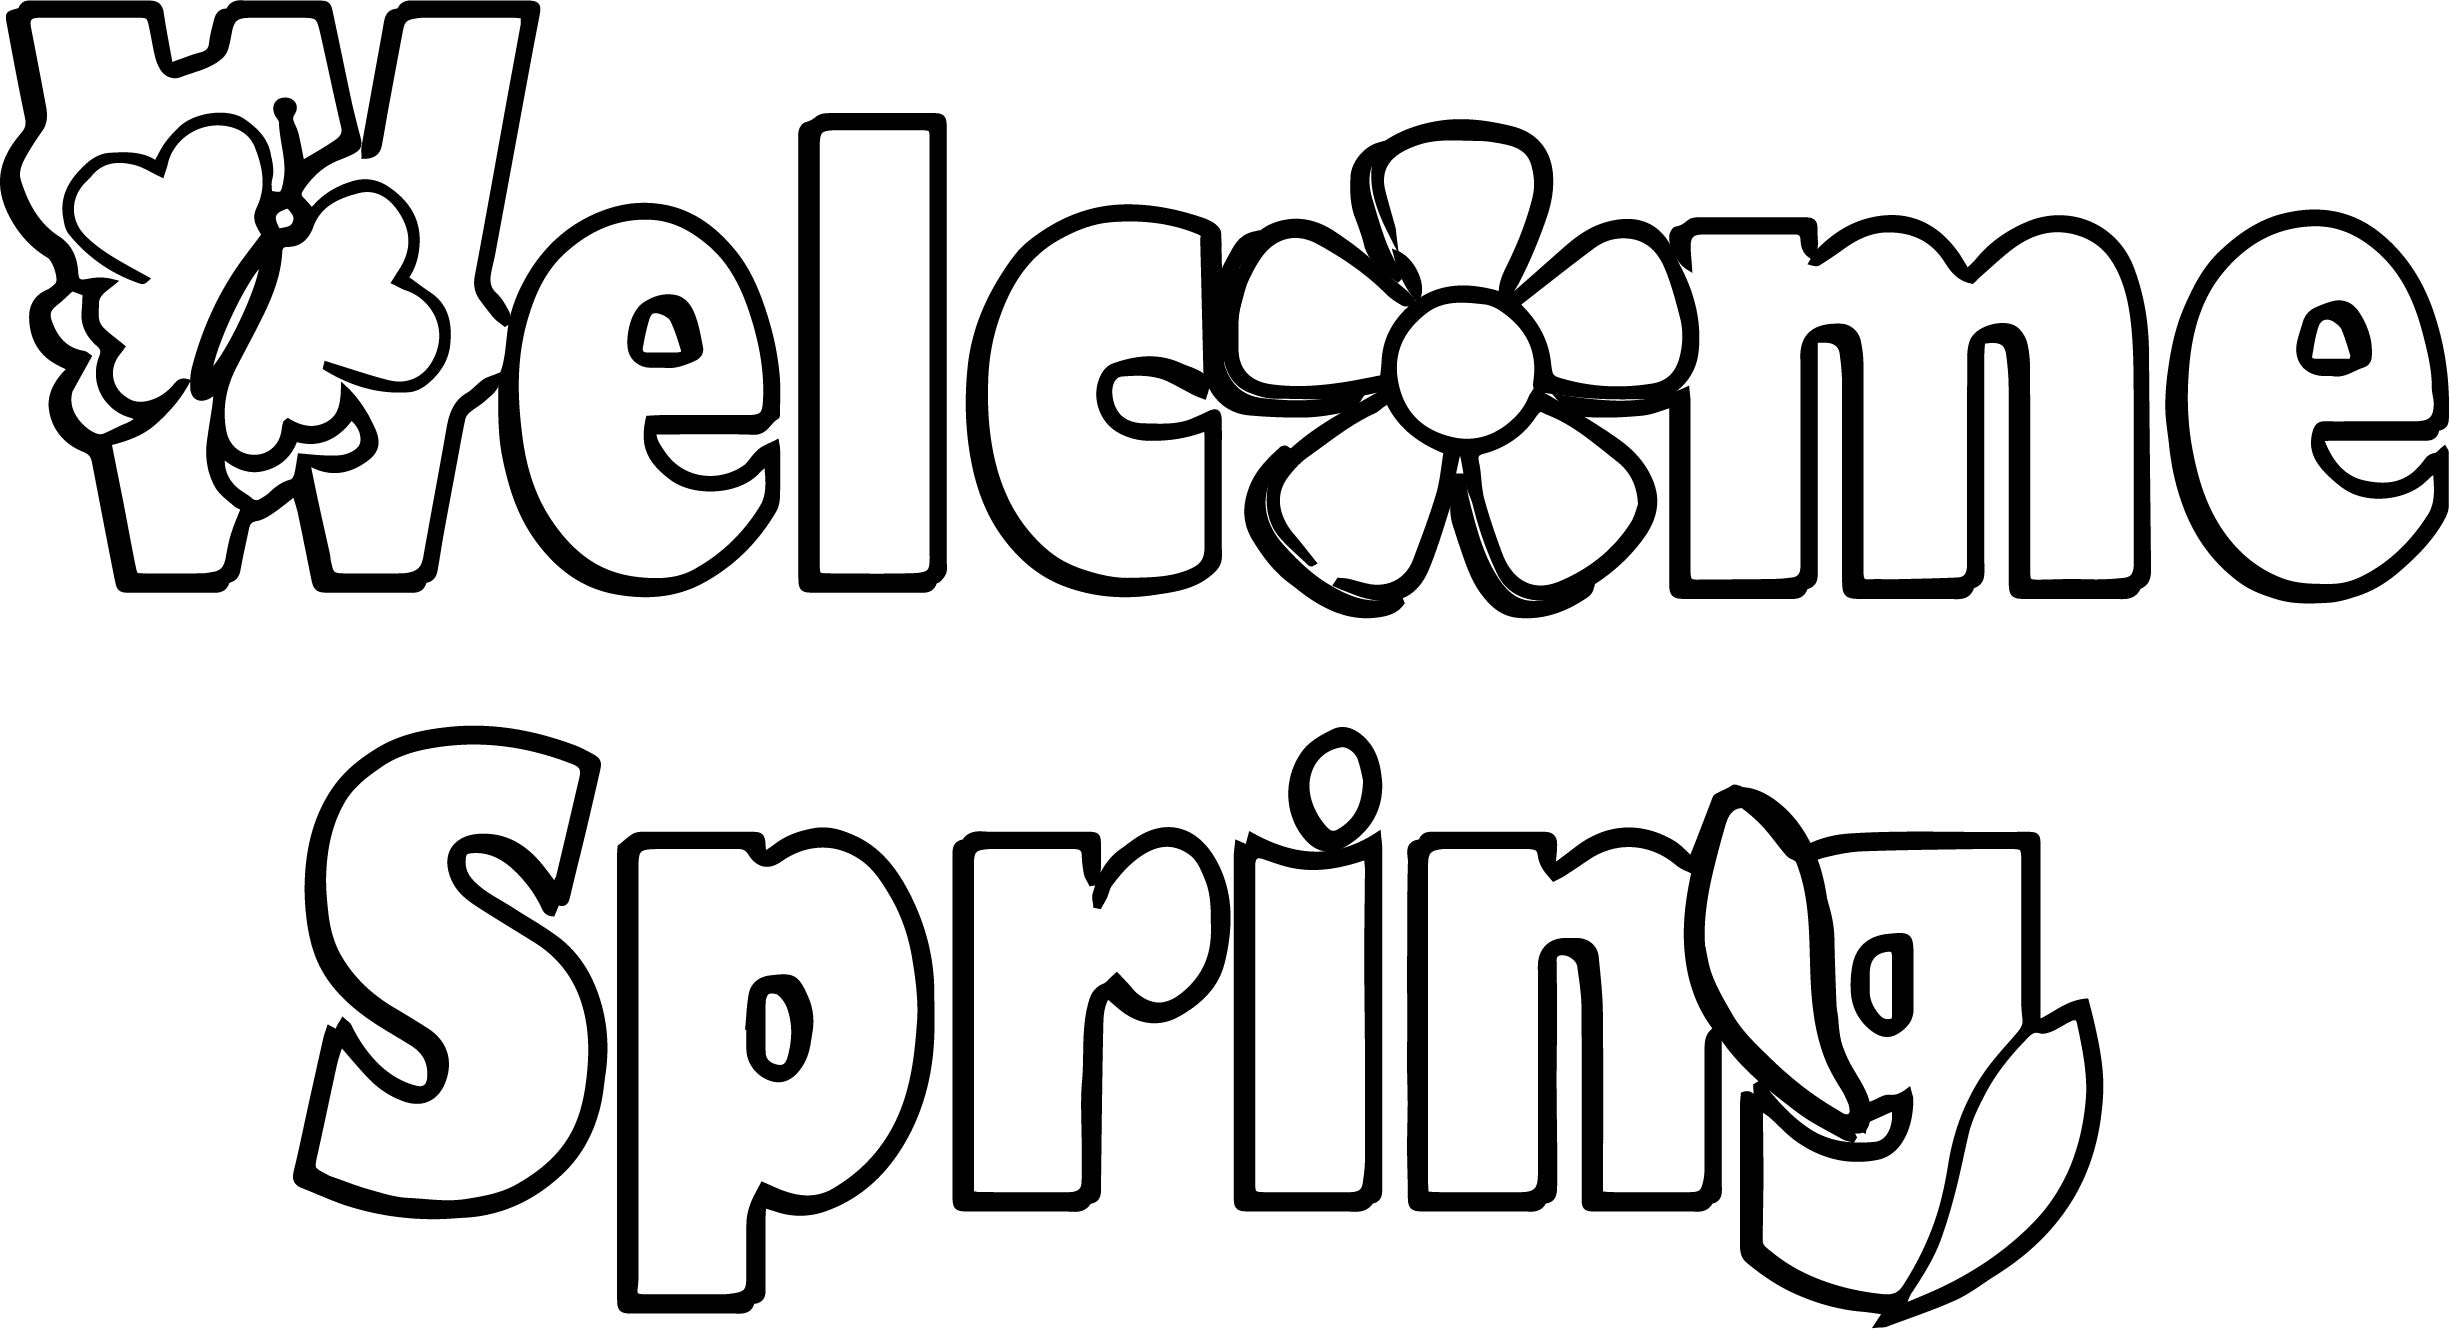 Wel e Spring Coloring Page Wecoloringpage